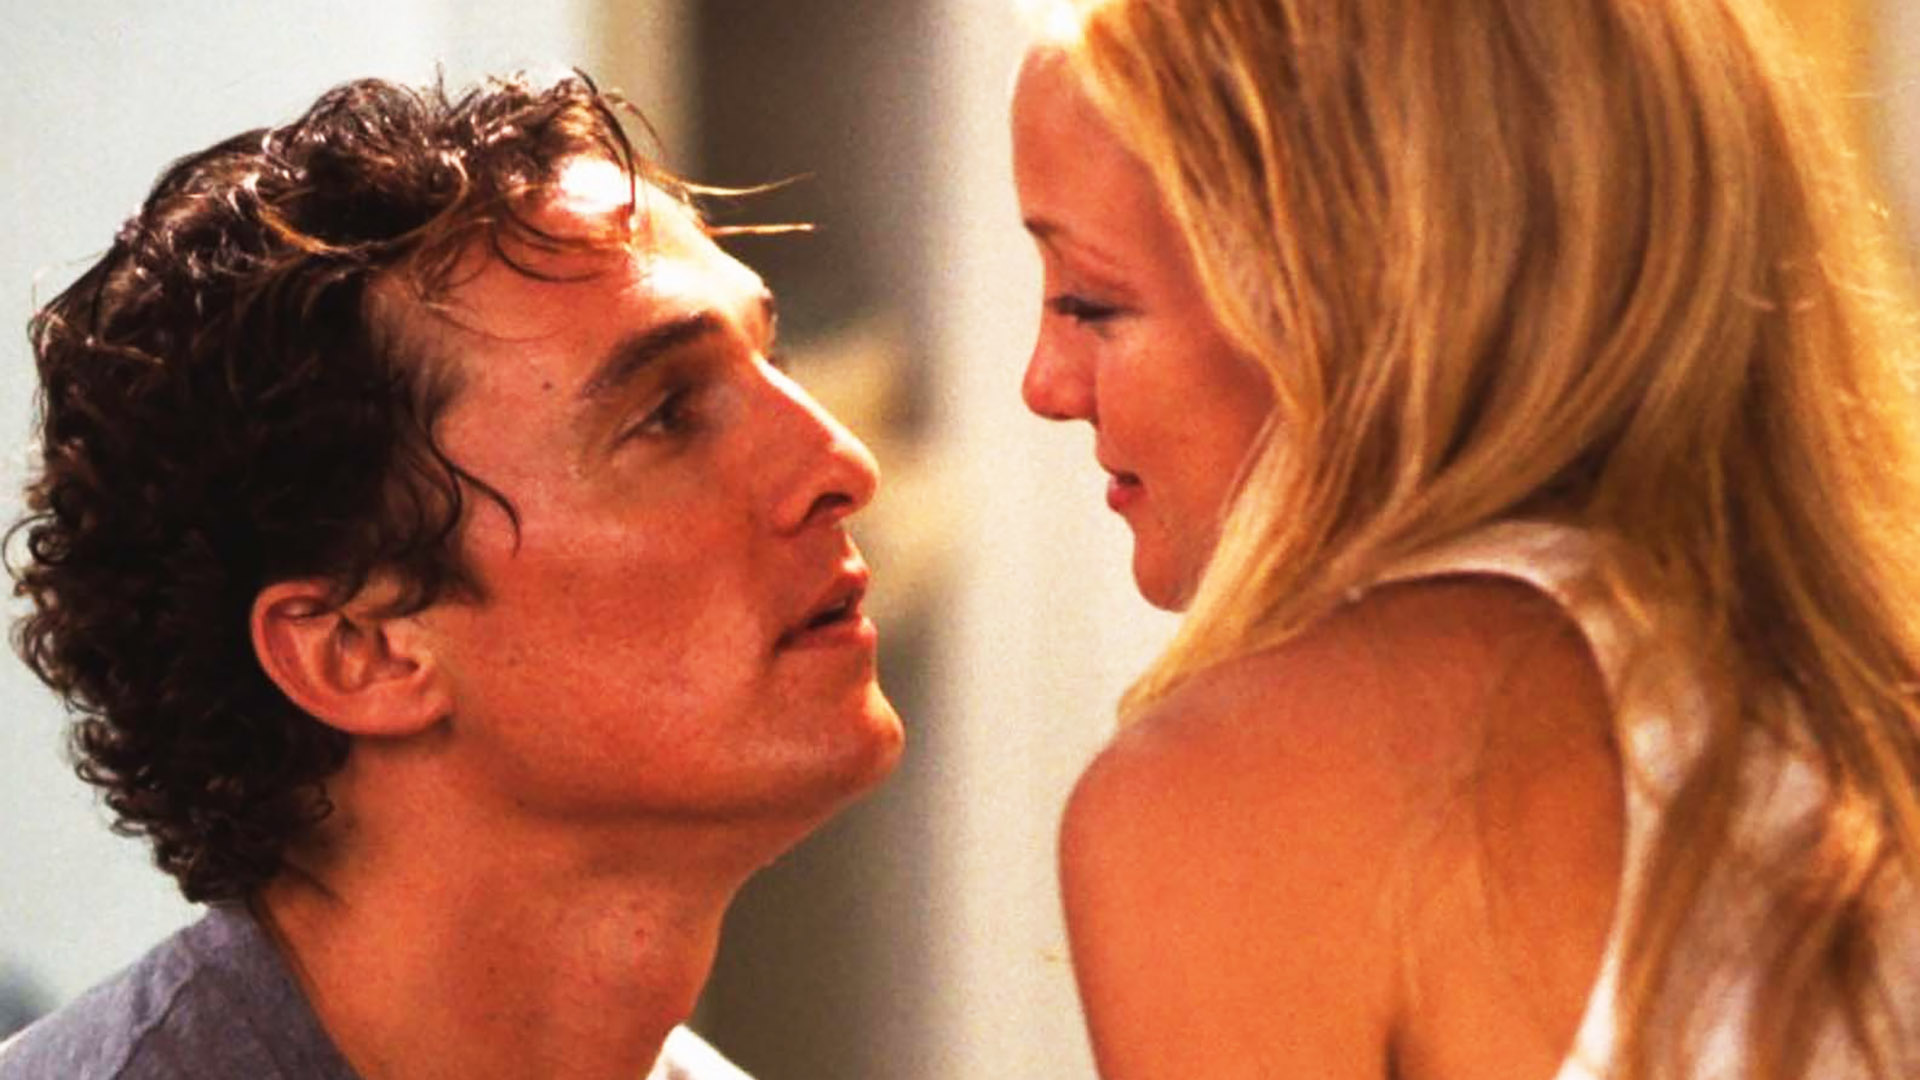 20 Years Later, Who's the Richest How to Lose a Guy in 10 Days Star?